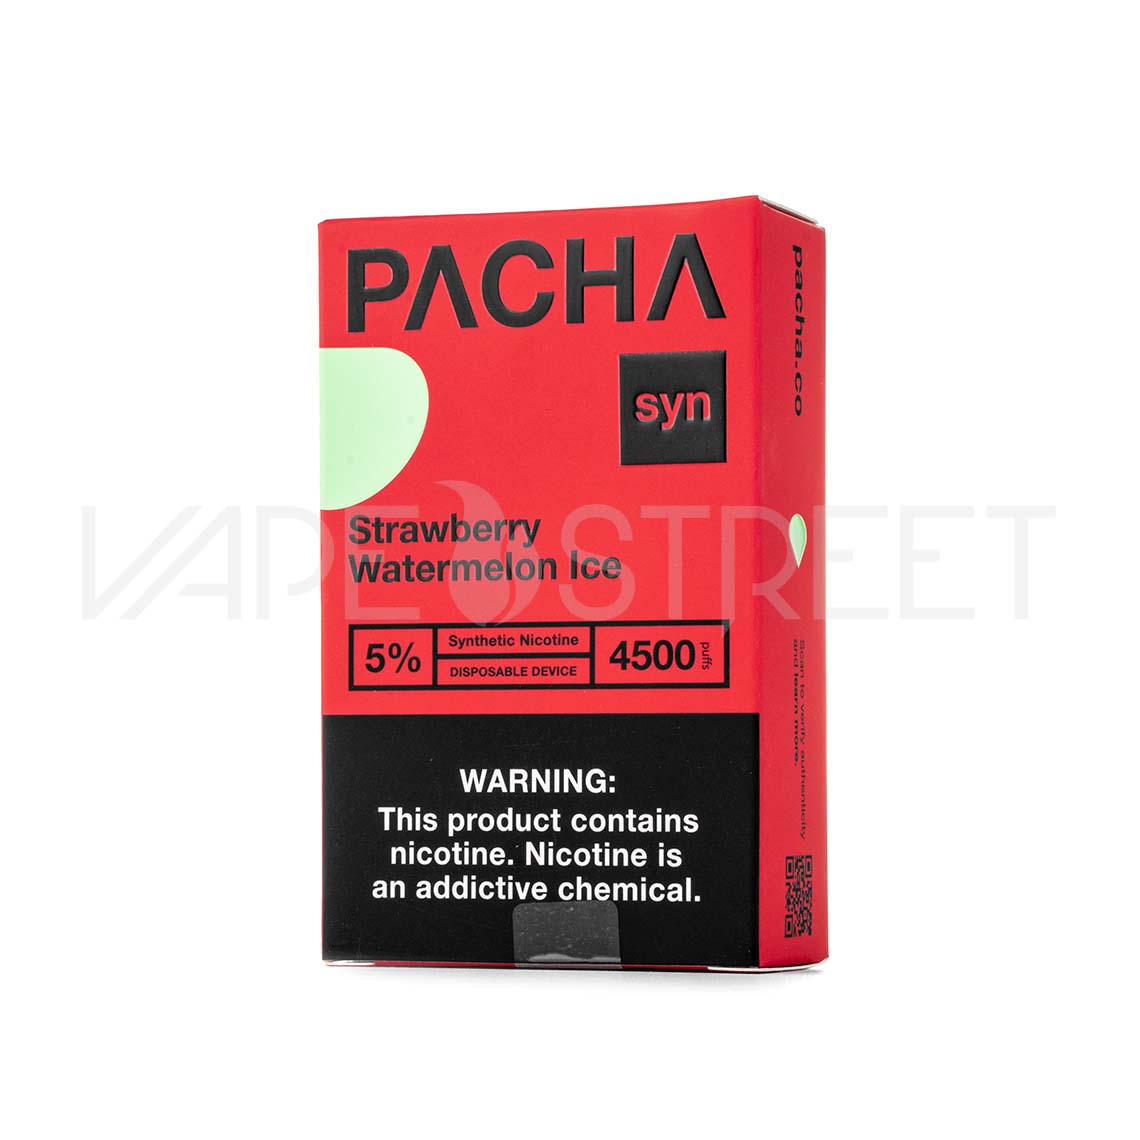 Pacha Syn Disposable Device 4500 Puffs Strawberry Watermelon Ice